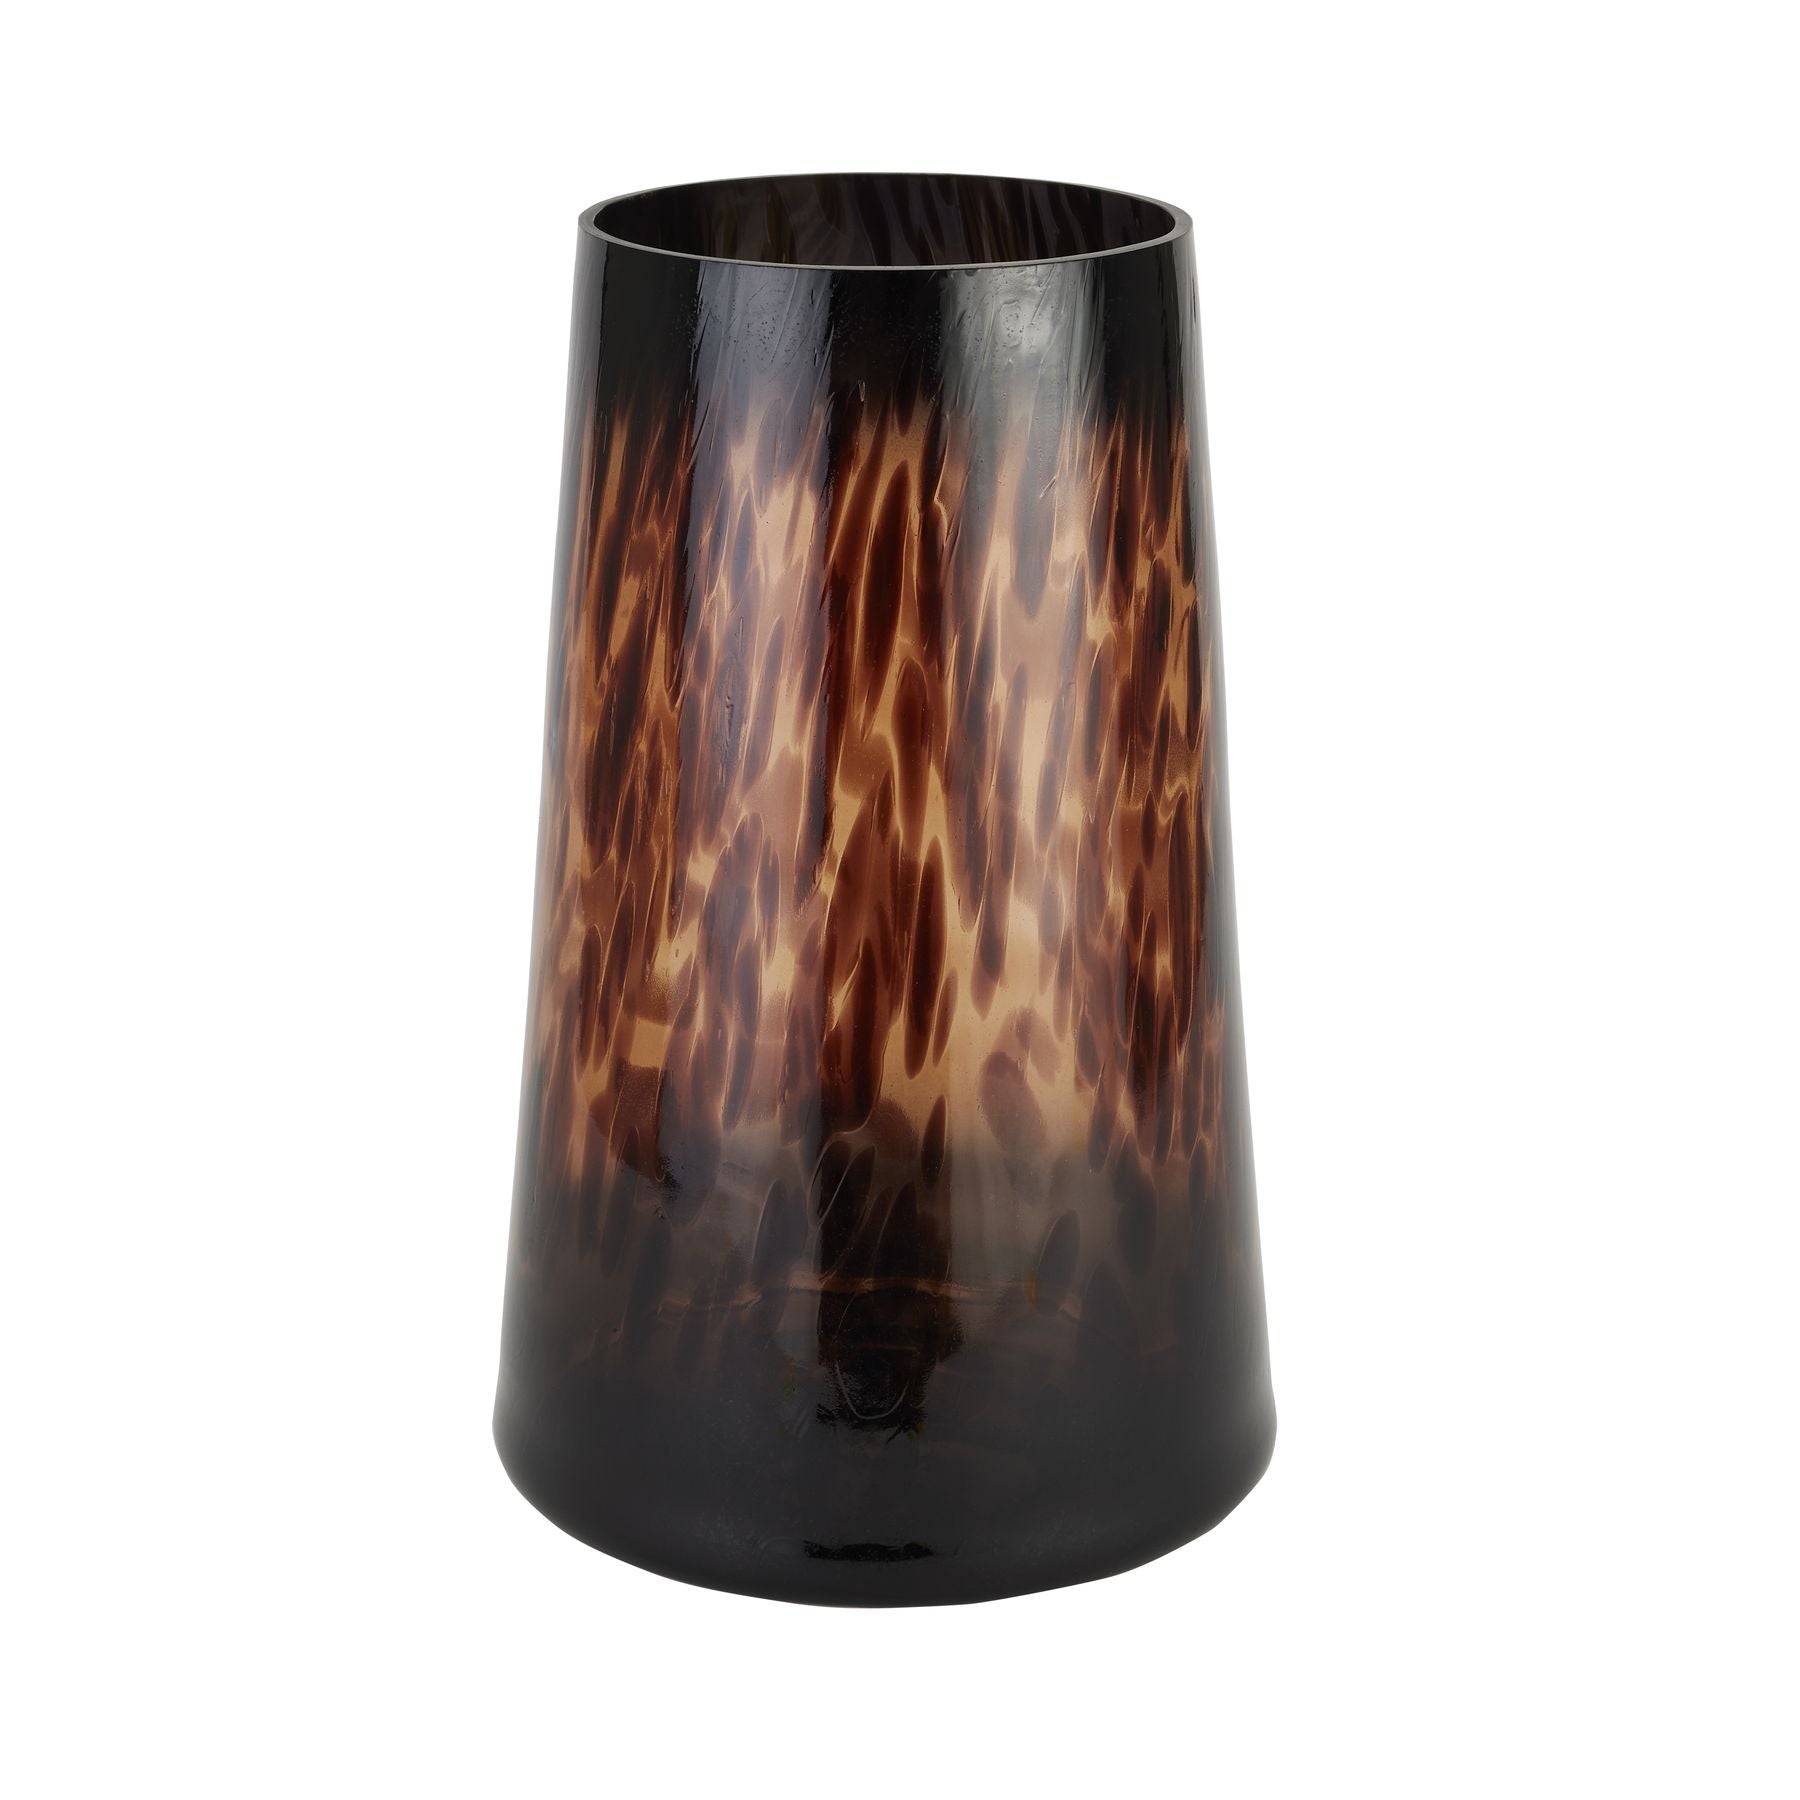 View Amber Dapple Tall Tapered Vase information